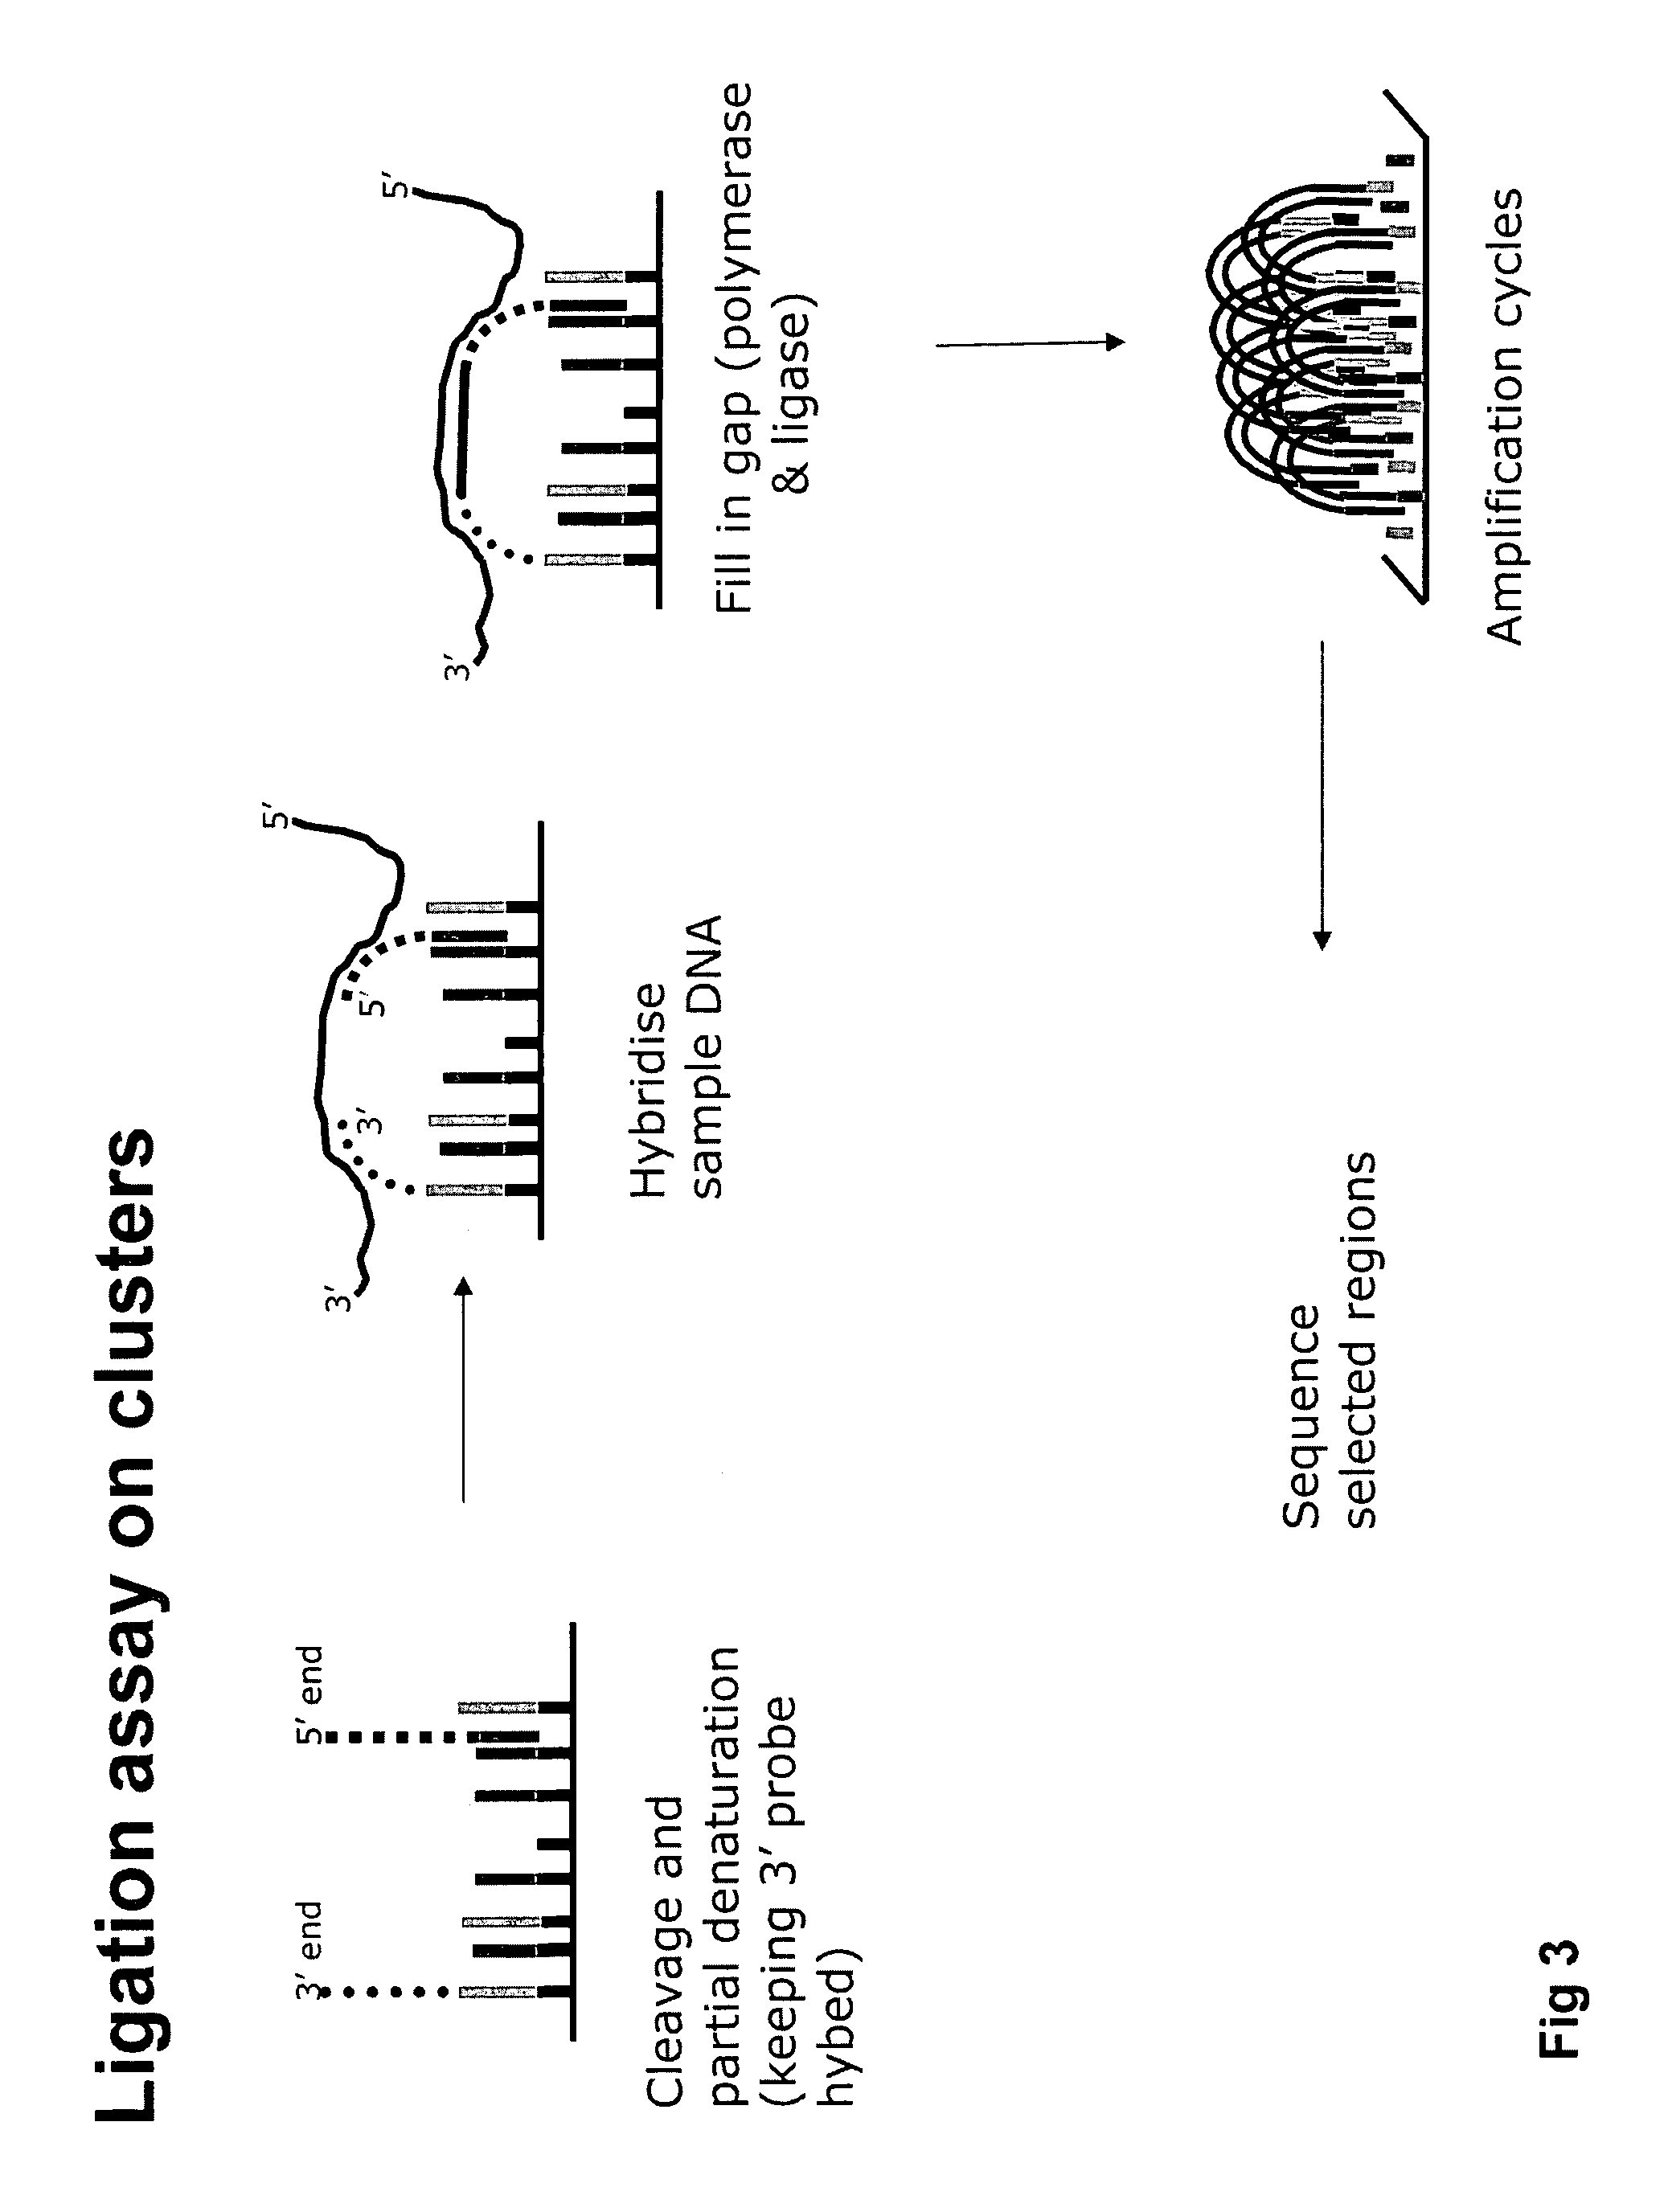 Nucleic acid sample enrichment for sequencing applications